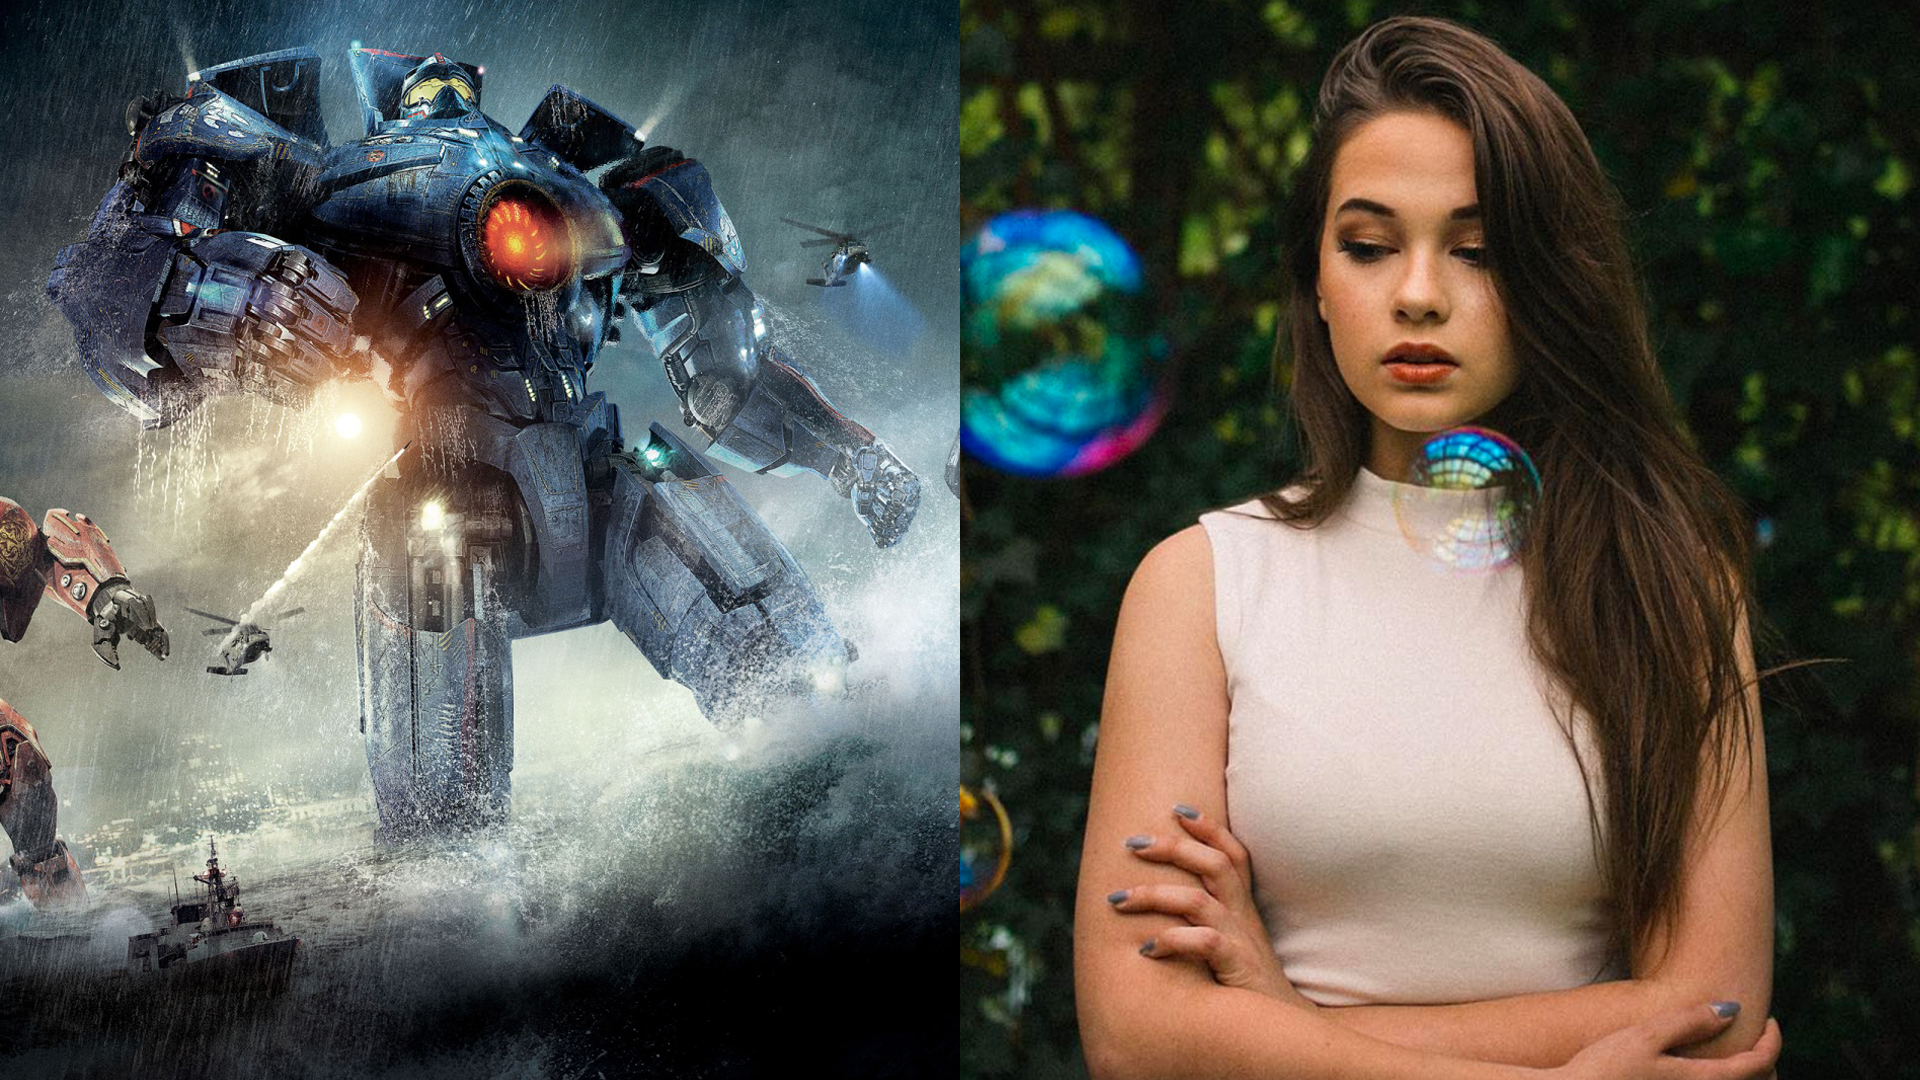 PACIFIC RIM 2 Casts Unknown Actress Cailee Spaeny as Female Lead